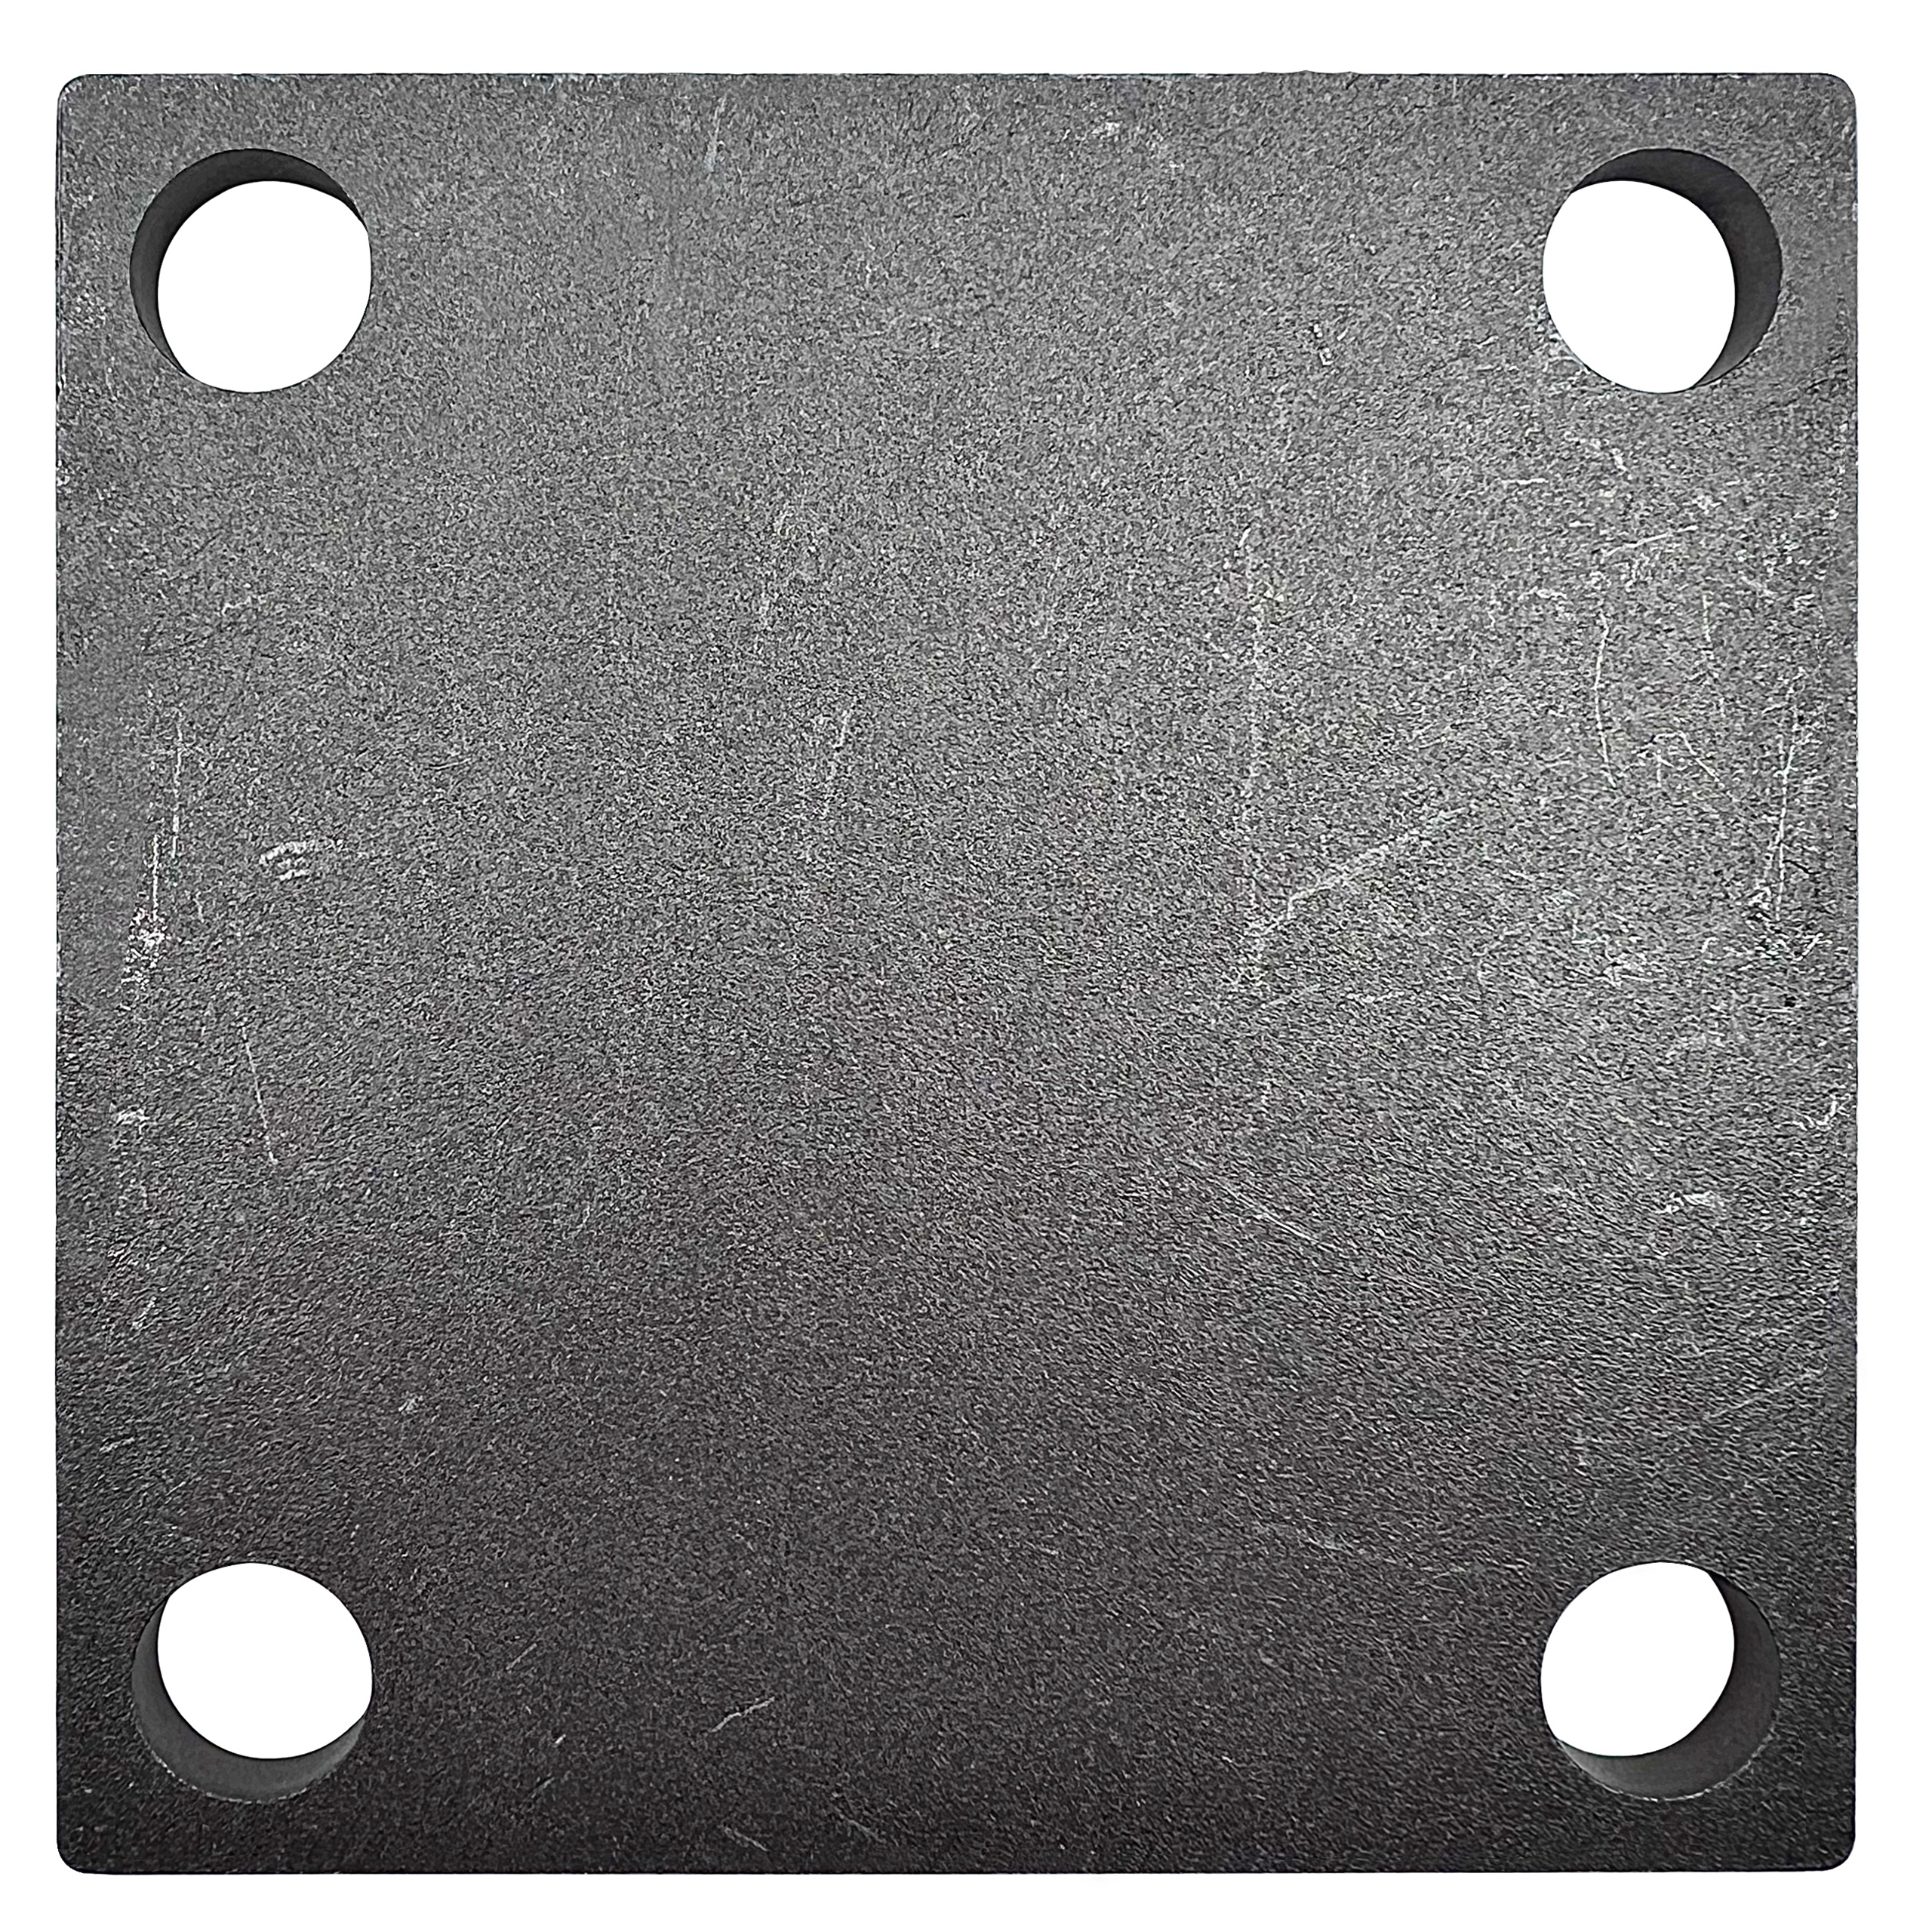 6x6" Weldable Square Steel Metal Baseplate 1/4" Thick 6mm - Laser Cut – A36 Heavy Duty Carbon Steel